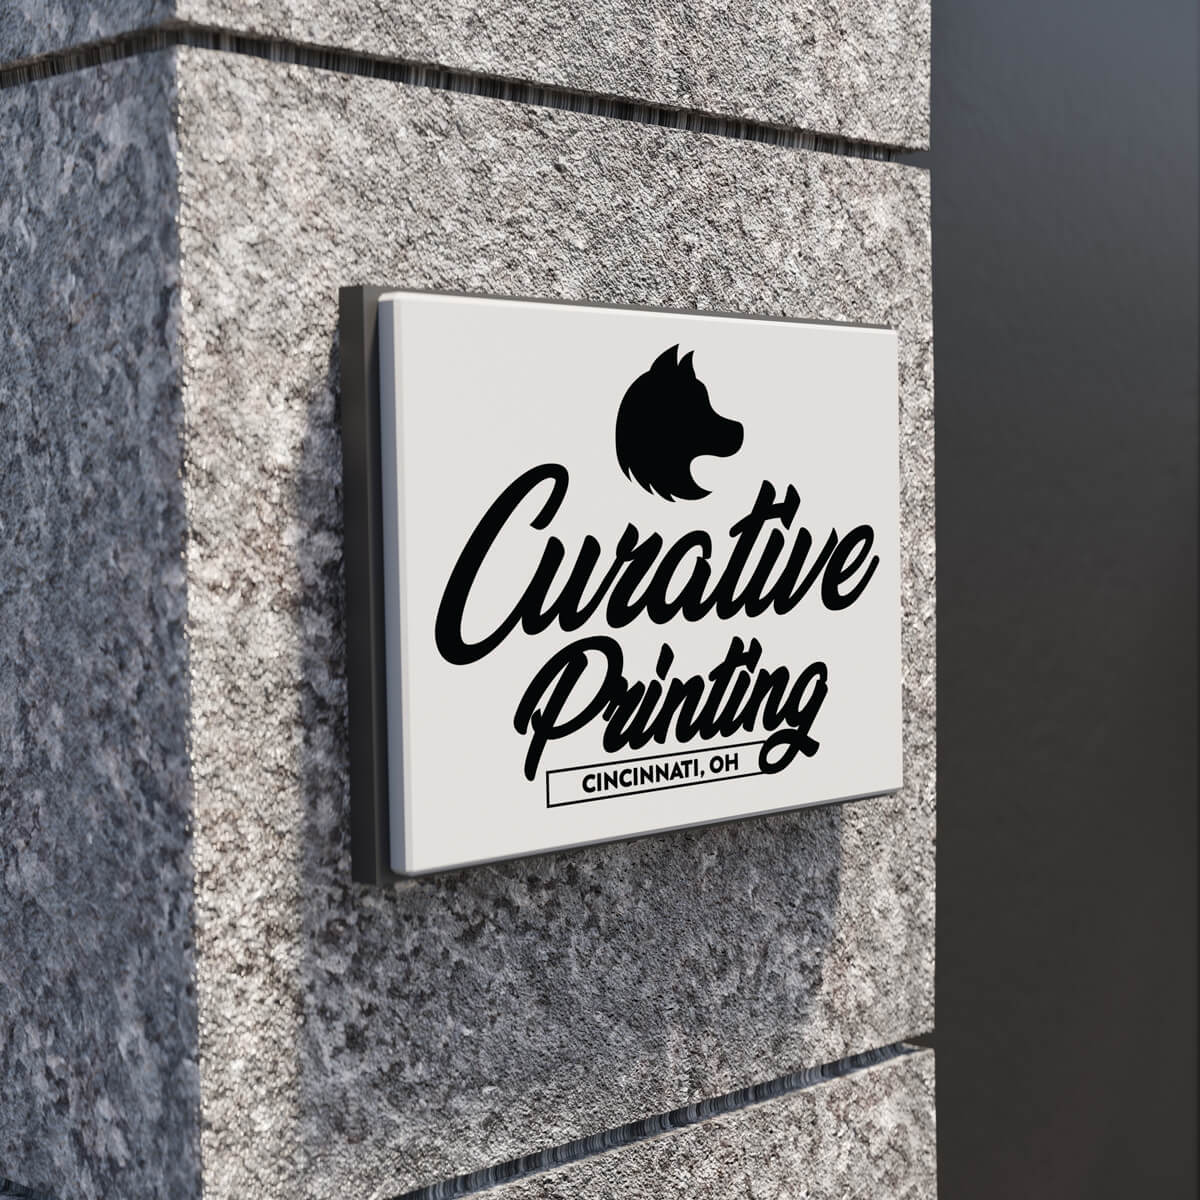 Outdoor entrance pvc signs and banners by Curative Printing